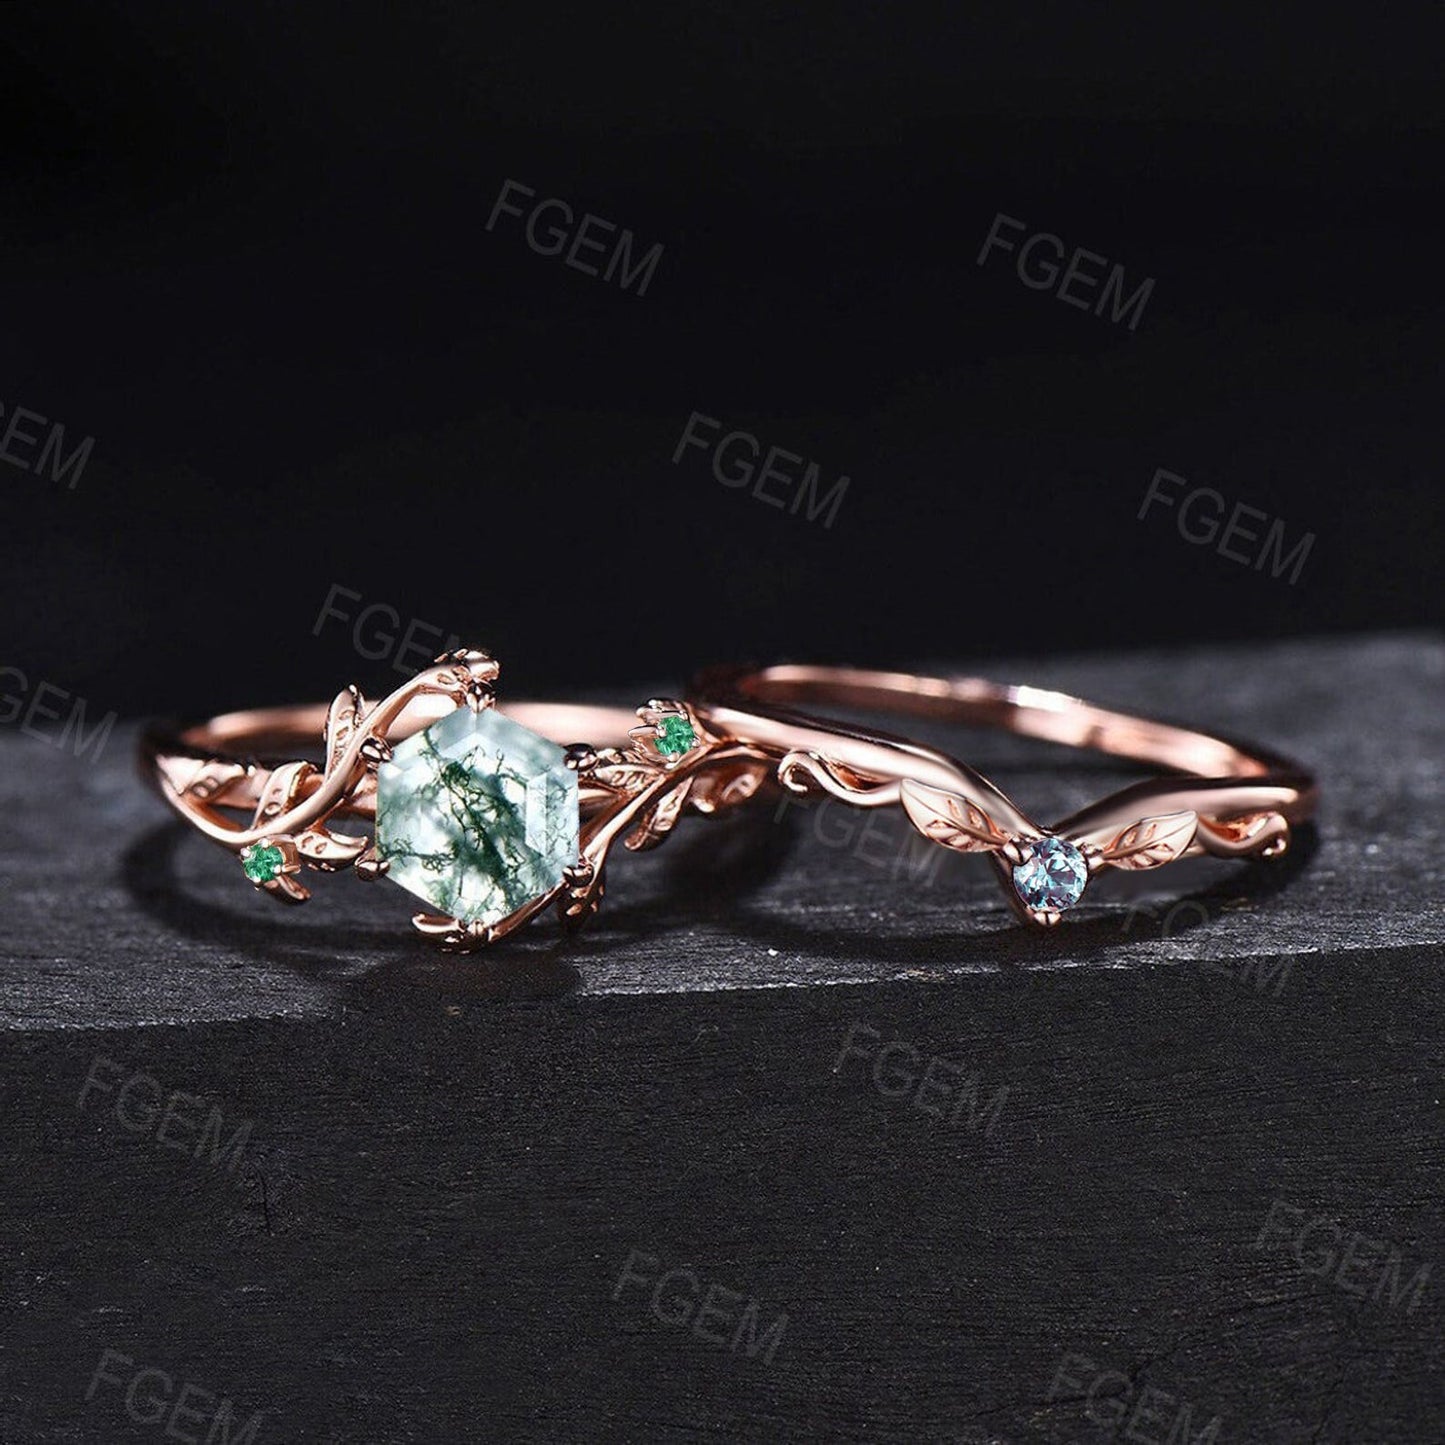 1ct Hexagon Nature Inspired Moss Agate Wedding Ring Set Rose Gold Vintage Branch Leaf Emerald Alexandrite Bridal Set Unique Promise Gifts